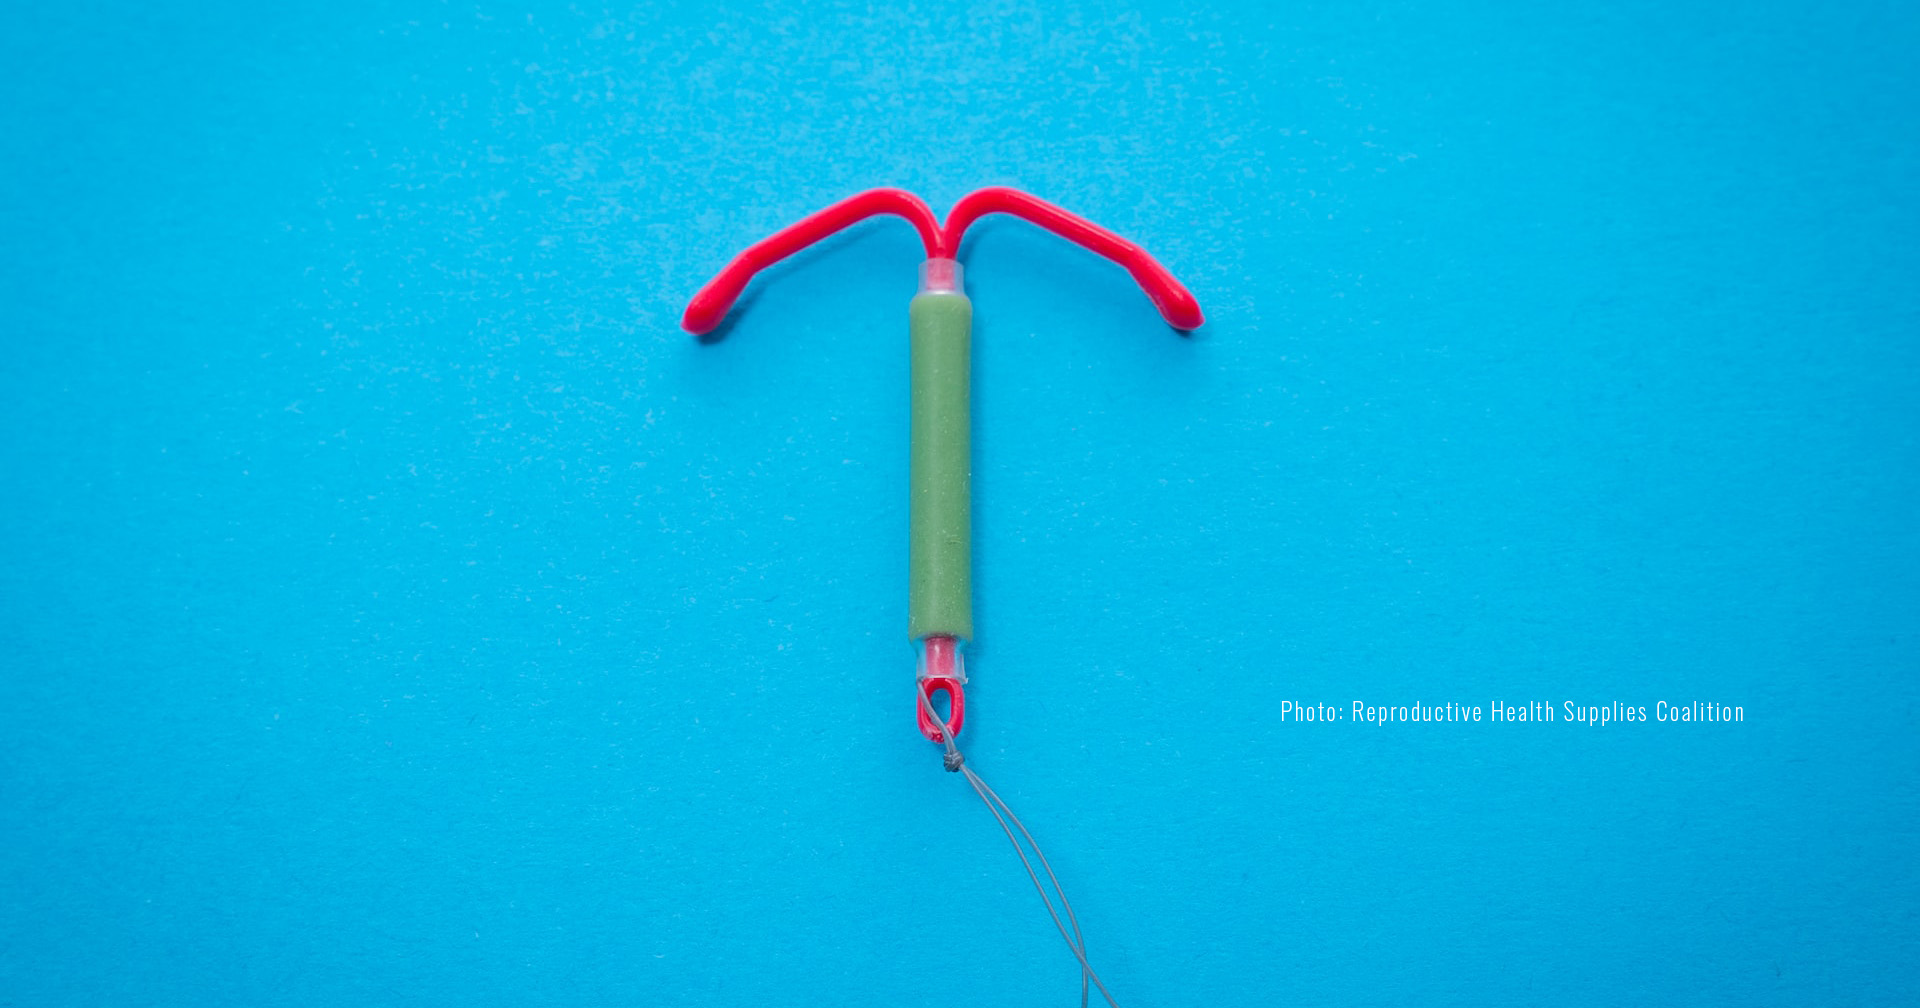 IUD on blue background. Photo credit: Reproductive Health Supplies Coalition